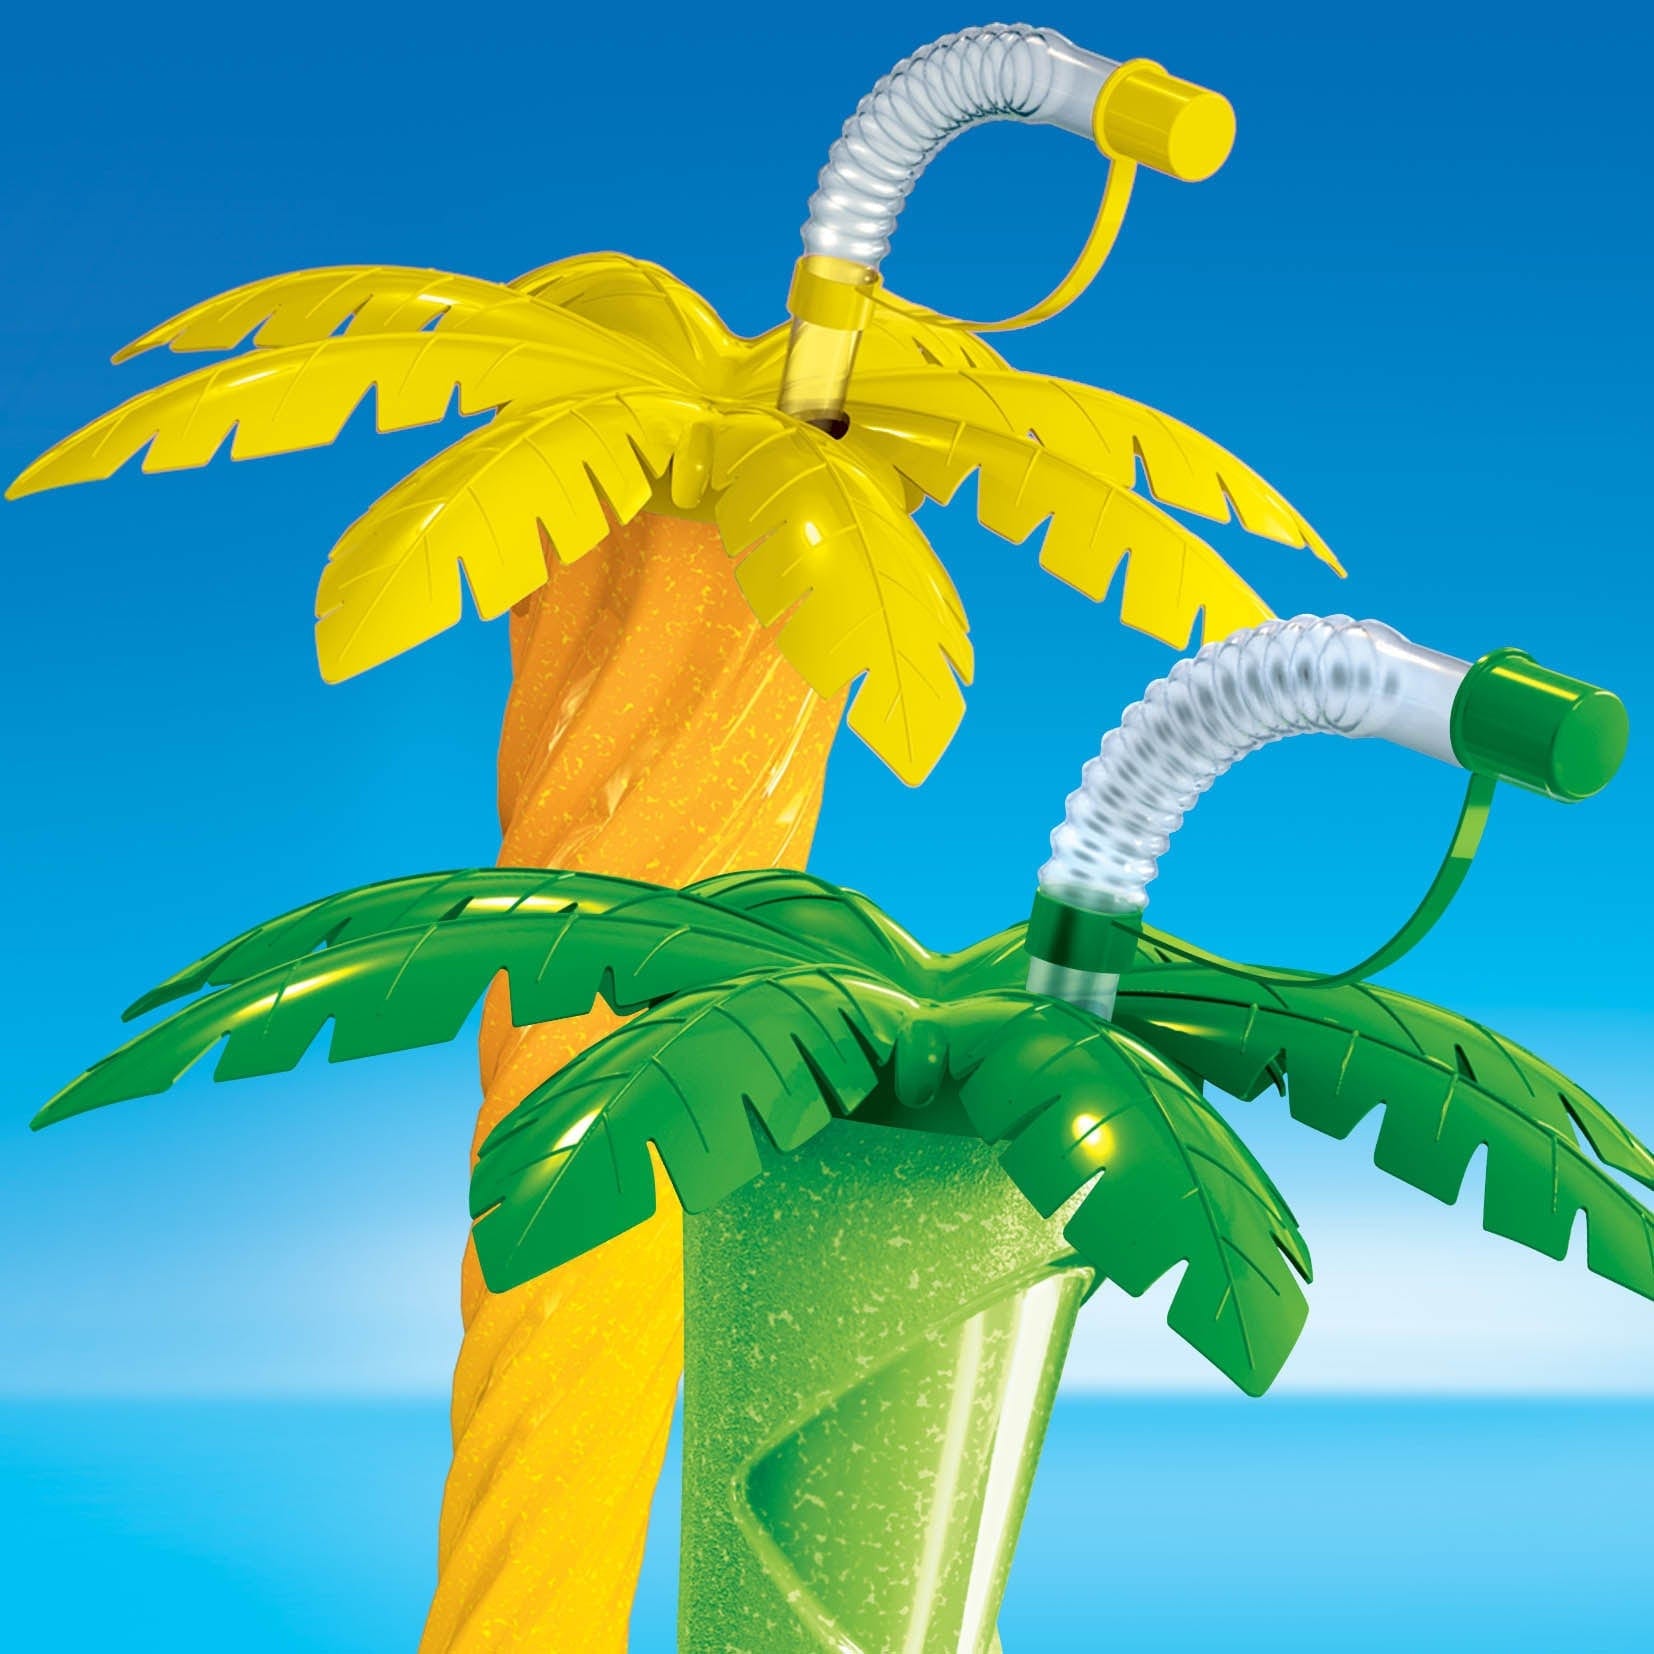 Sweet World USA Yard Cups Palm Cup Palm Tree Luau Yard Cups (108 cups) - for Margaritas, Cold Drinks, Frozen Drinks, Kids Parties - 14 oz. (400 ml) - Yellow cups with lids and straws